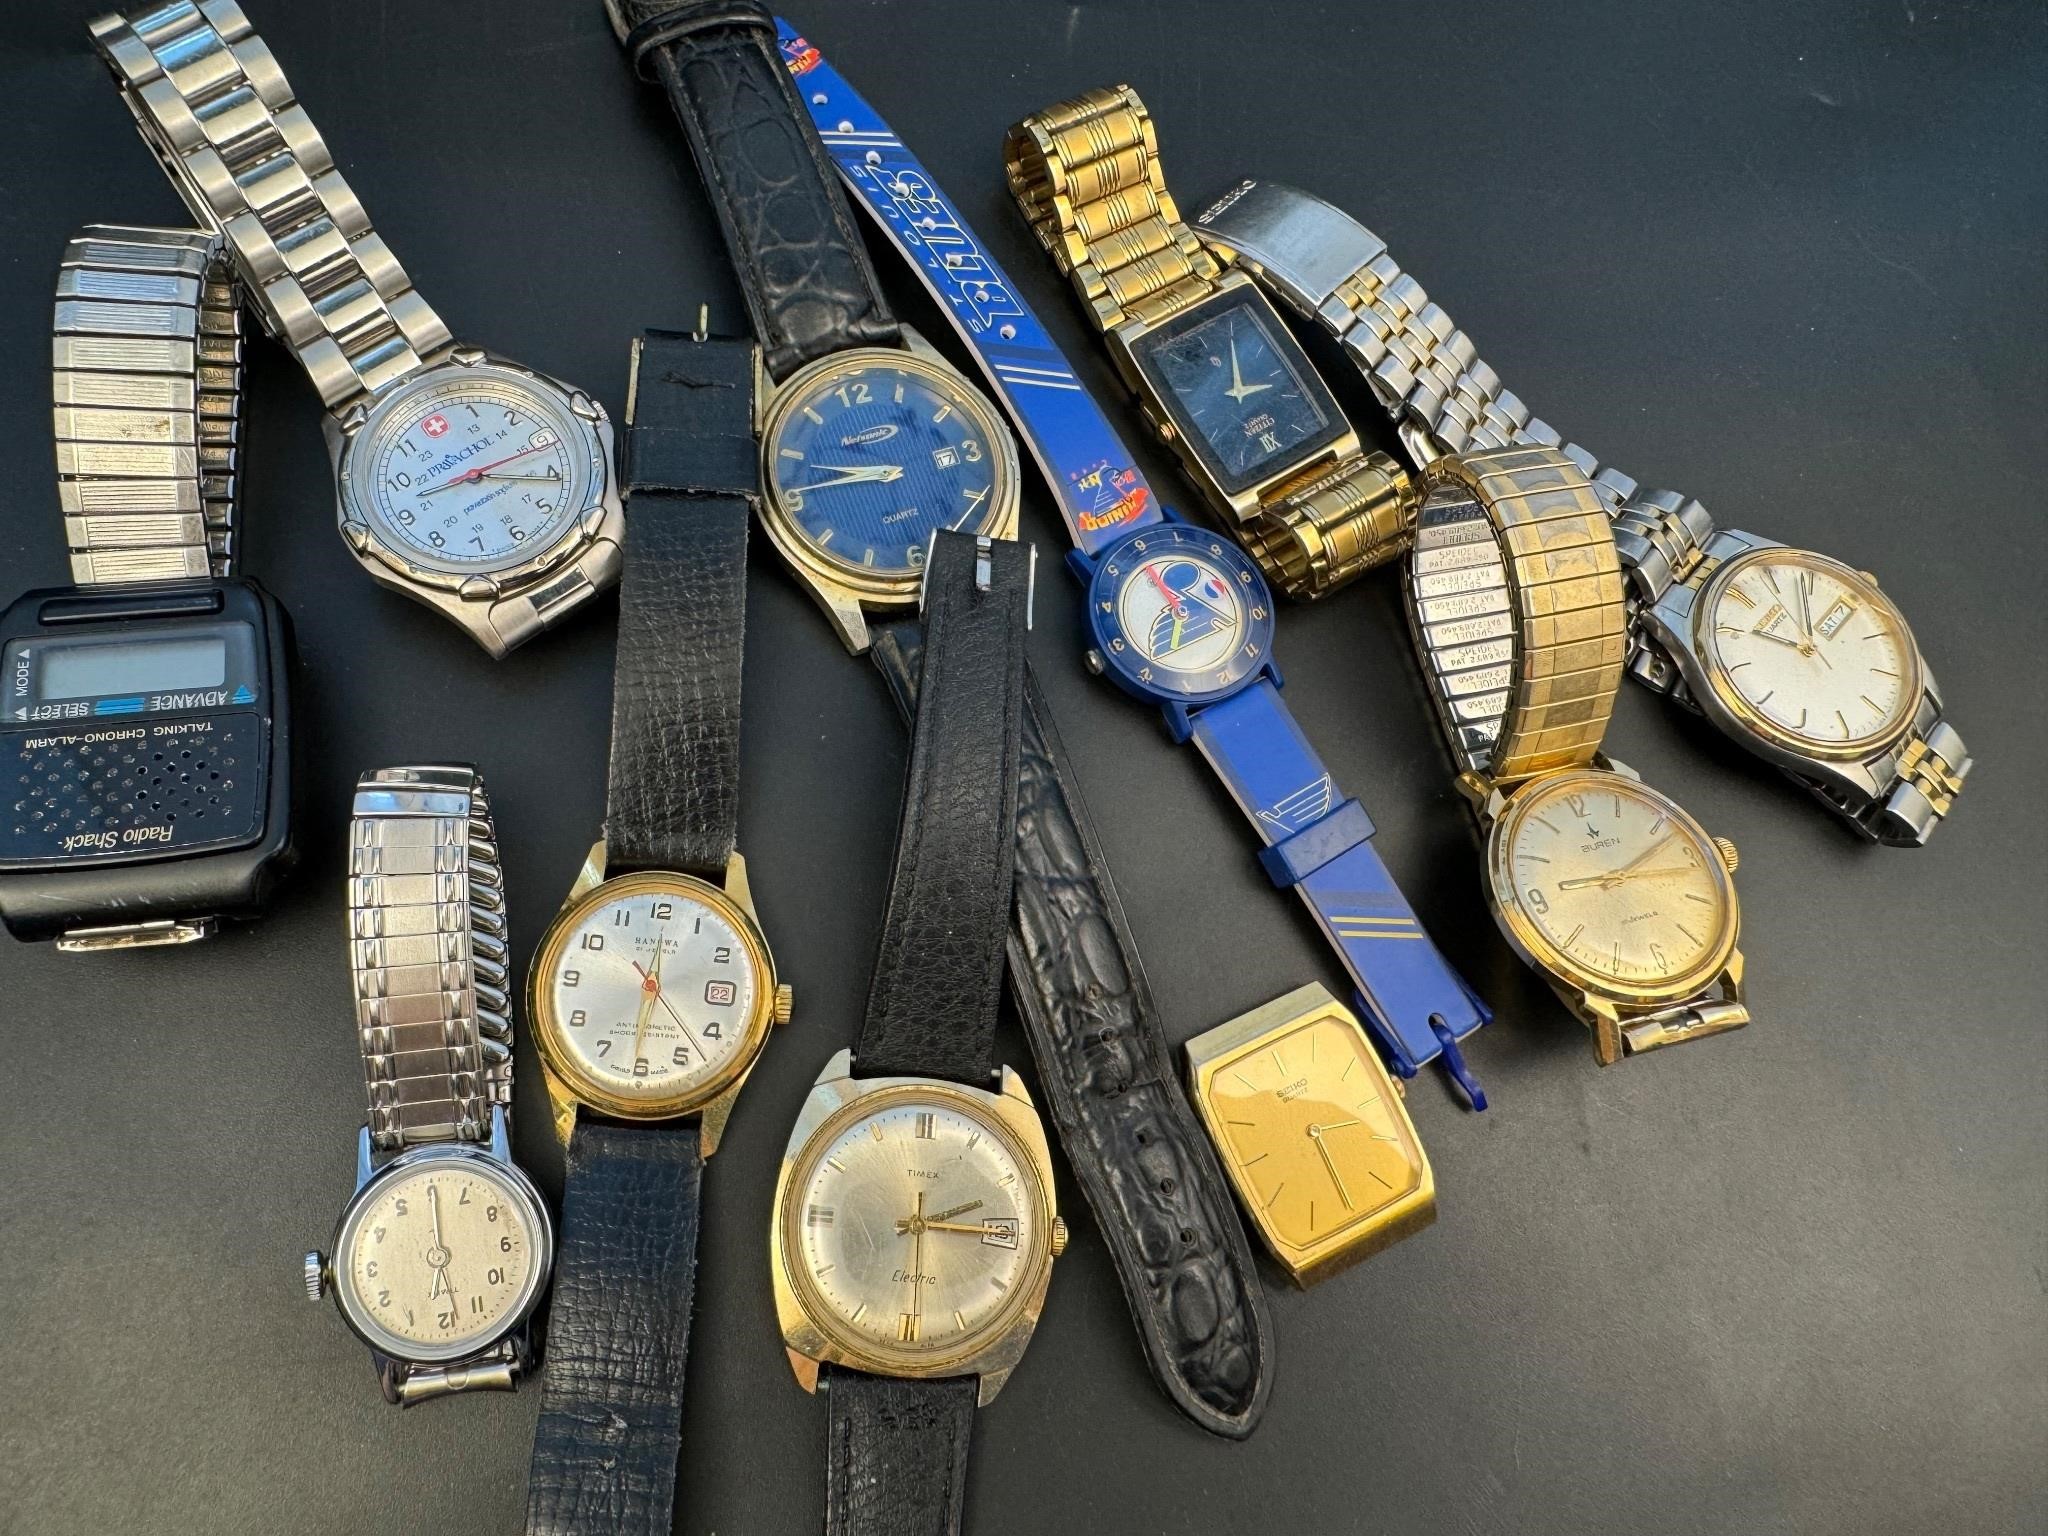 Timex, citizen, buran and more watches lot